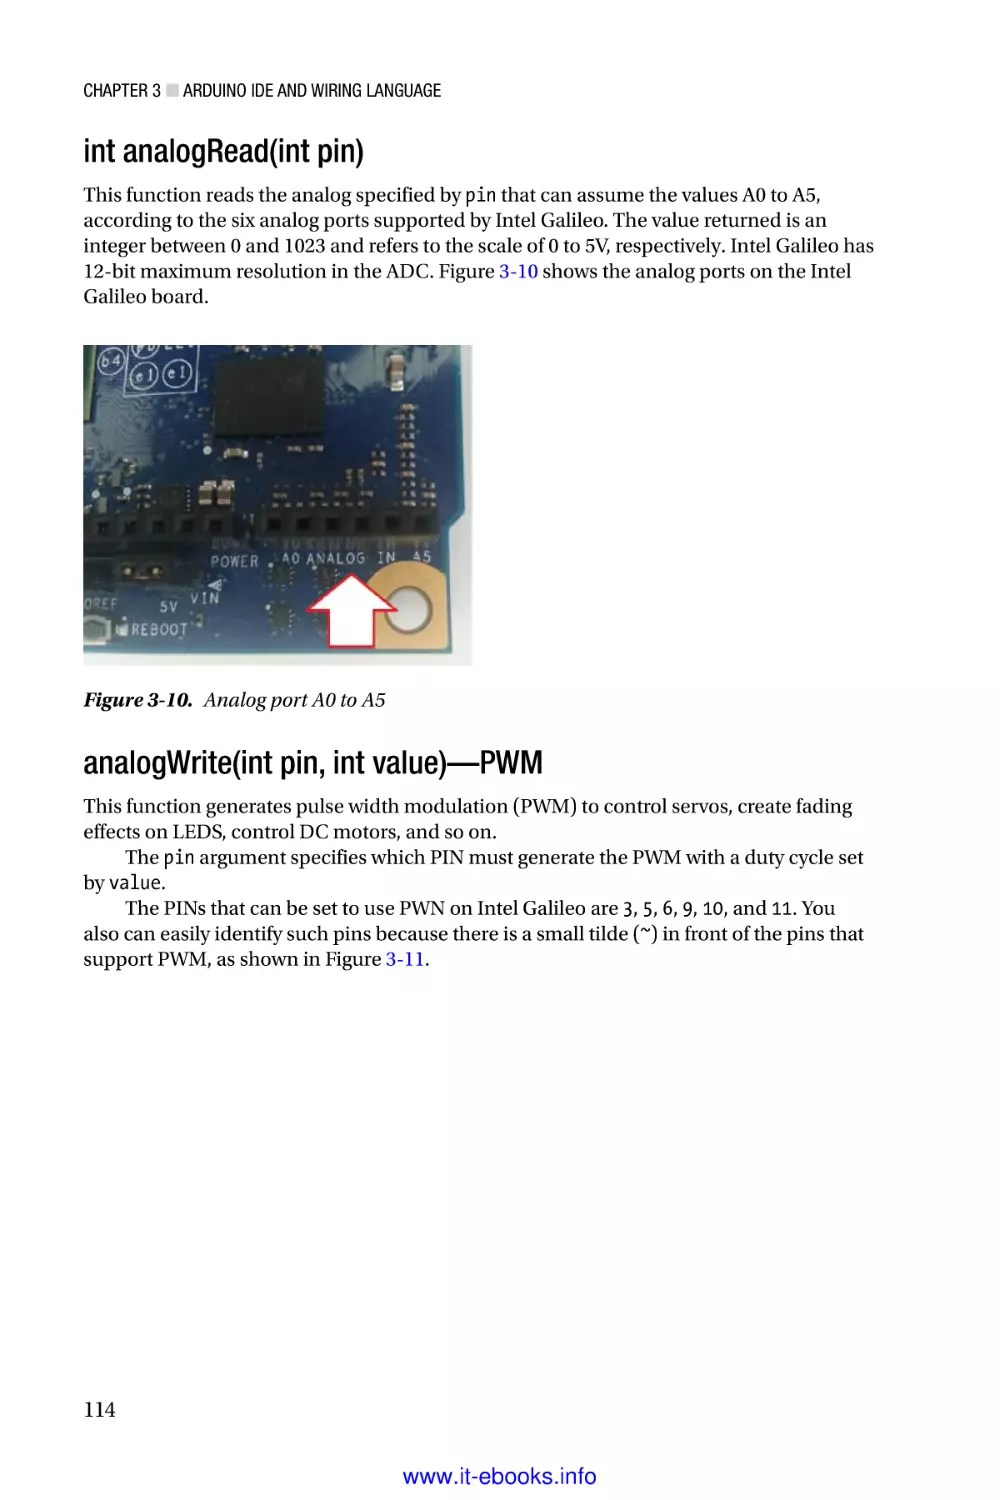 int analogRead (int pin)
analogWrite (int pin, int value)—PWM